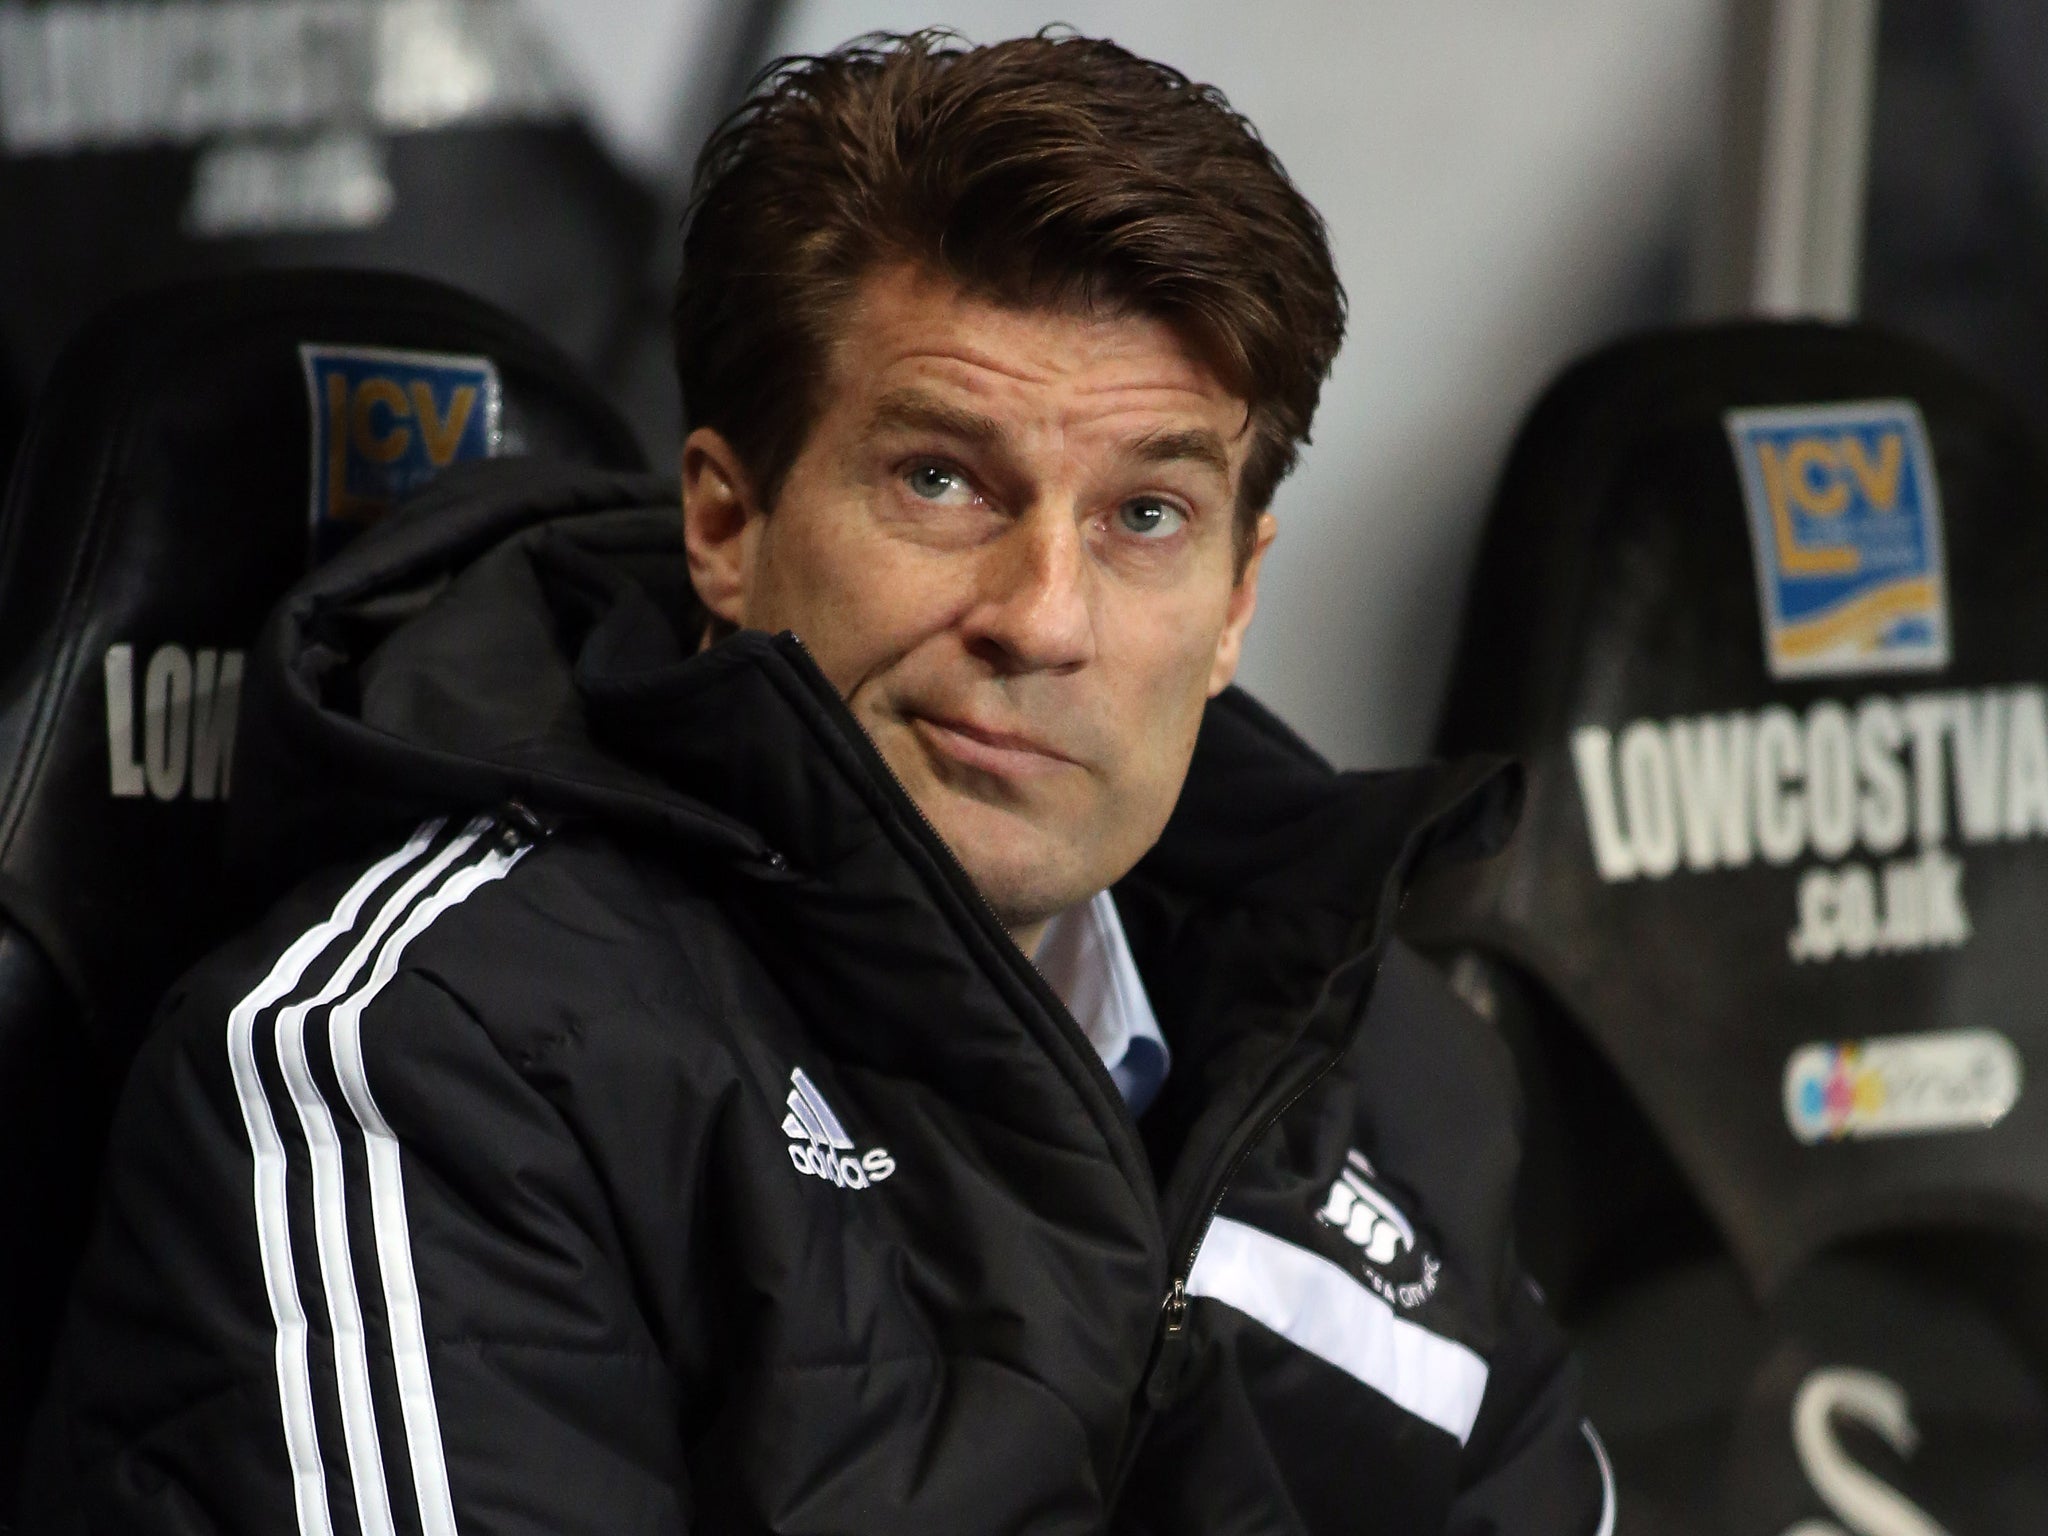 Swansea manager Michael Laudrup has insisted that the disrupted flight to Switzerland has not hampered their plans for their Europa League clash against St Gallen